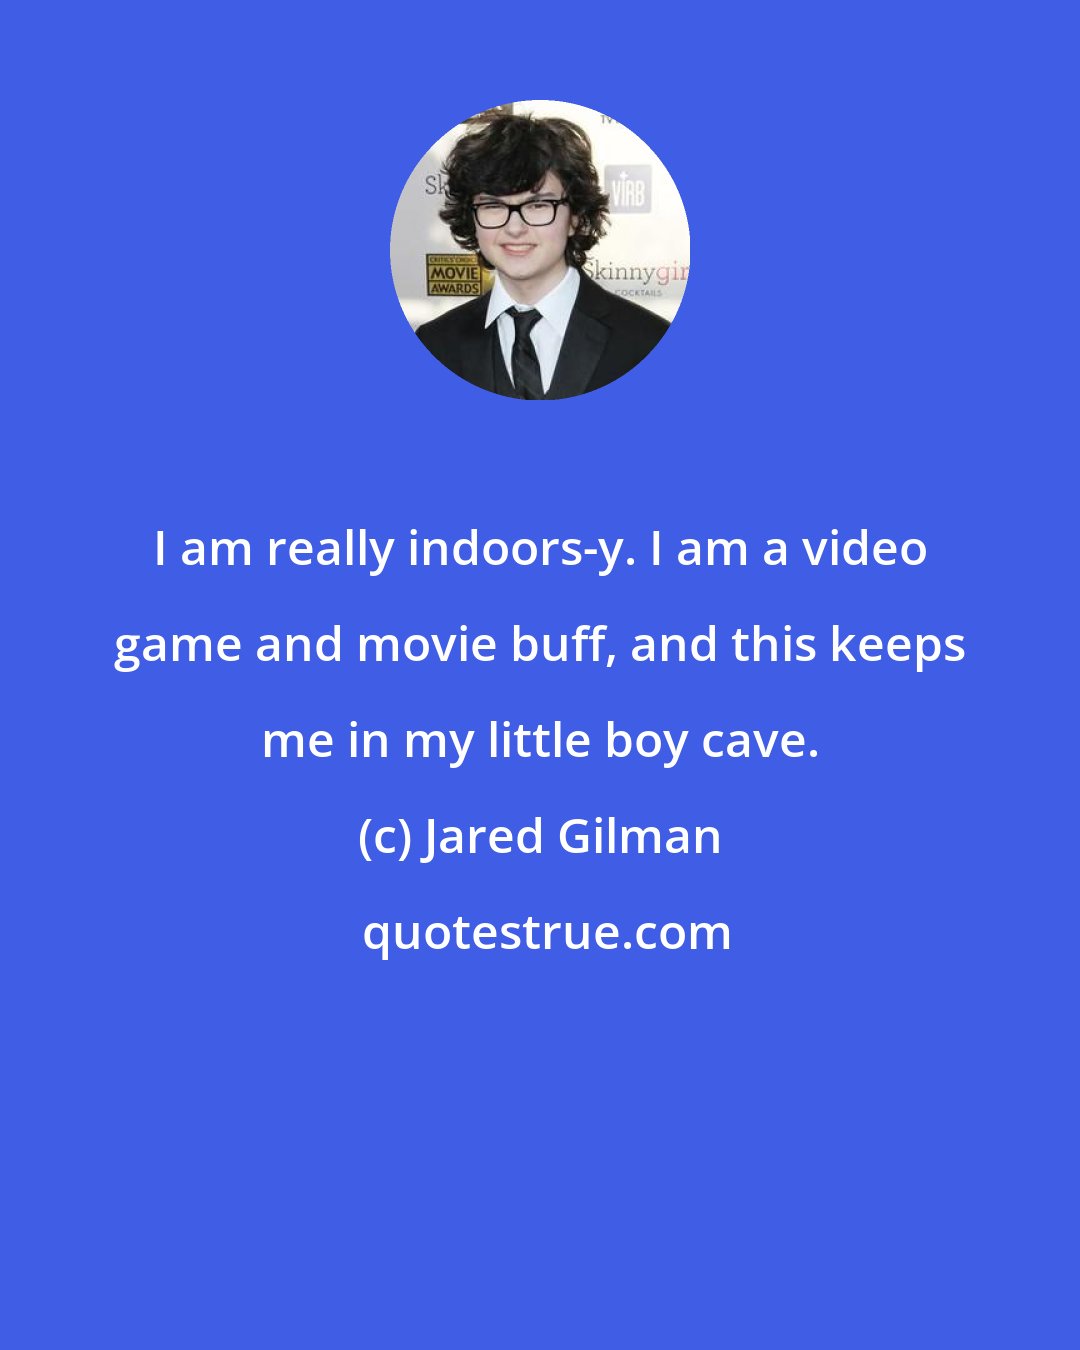 Jared Gilman: I am really indoors-y. I am a video game and movie buff, and this keeps me in my little boy cave.